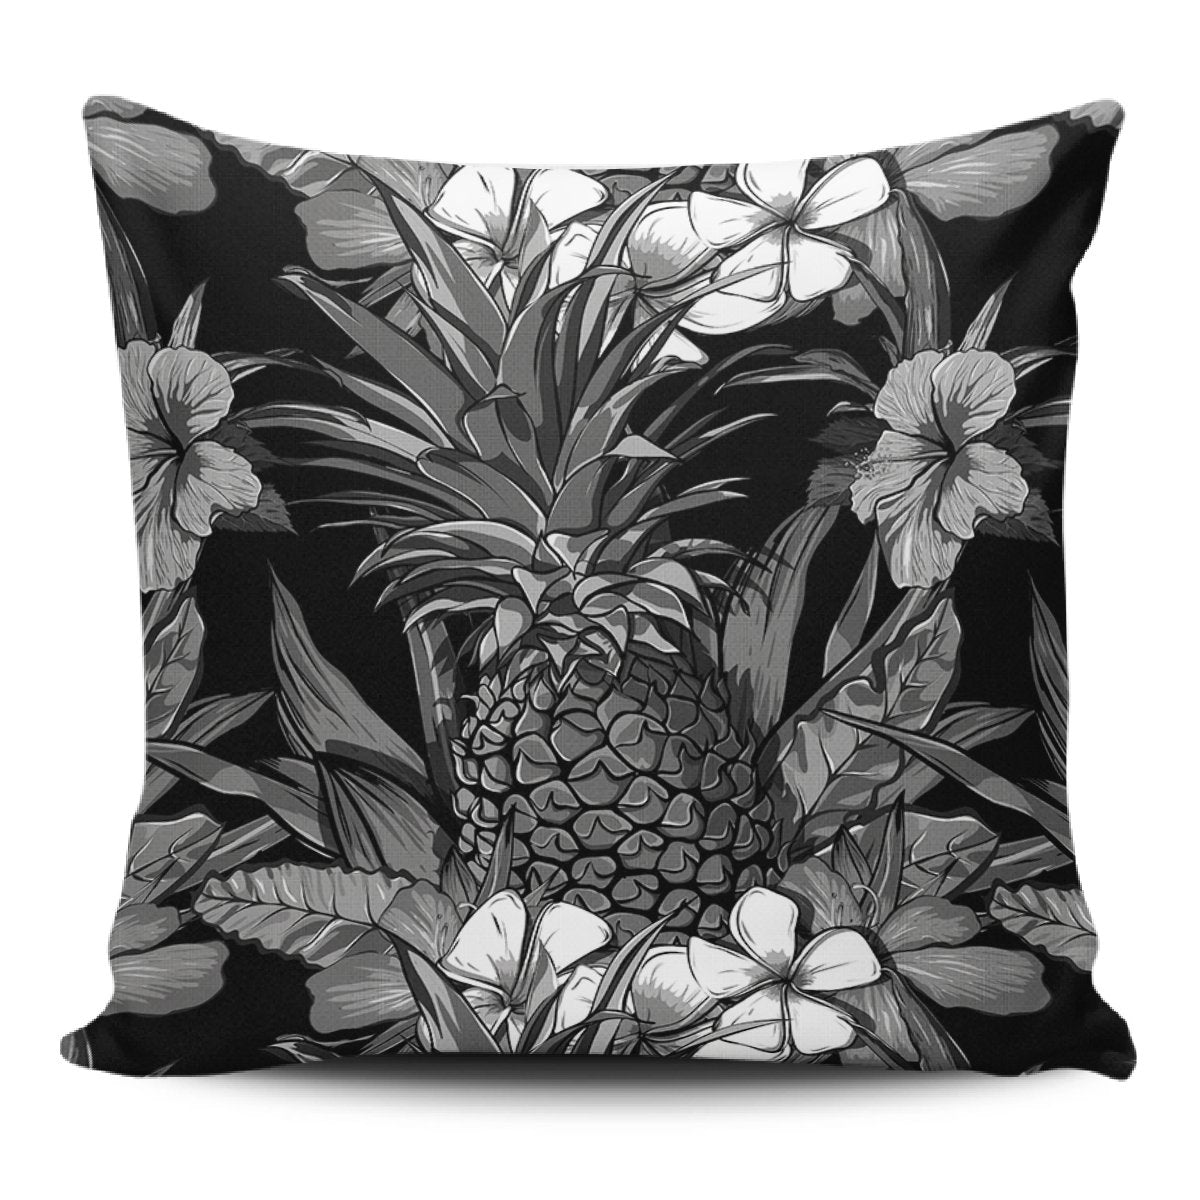 Pineapple Hibiscus Black And White Pillow Covers One Size Zippered Pillow Case 18"x18"(Twin Sides) Black - Polynesian Pride